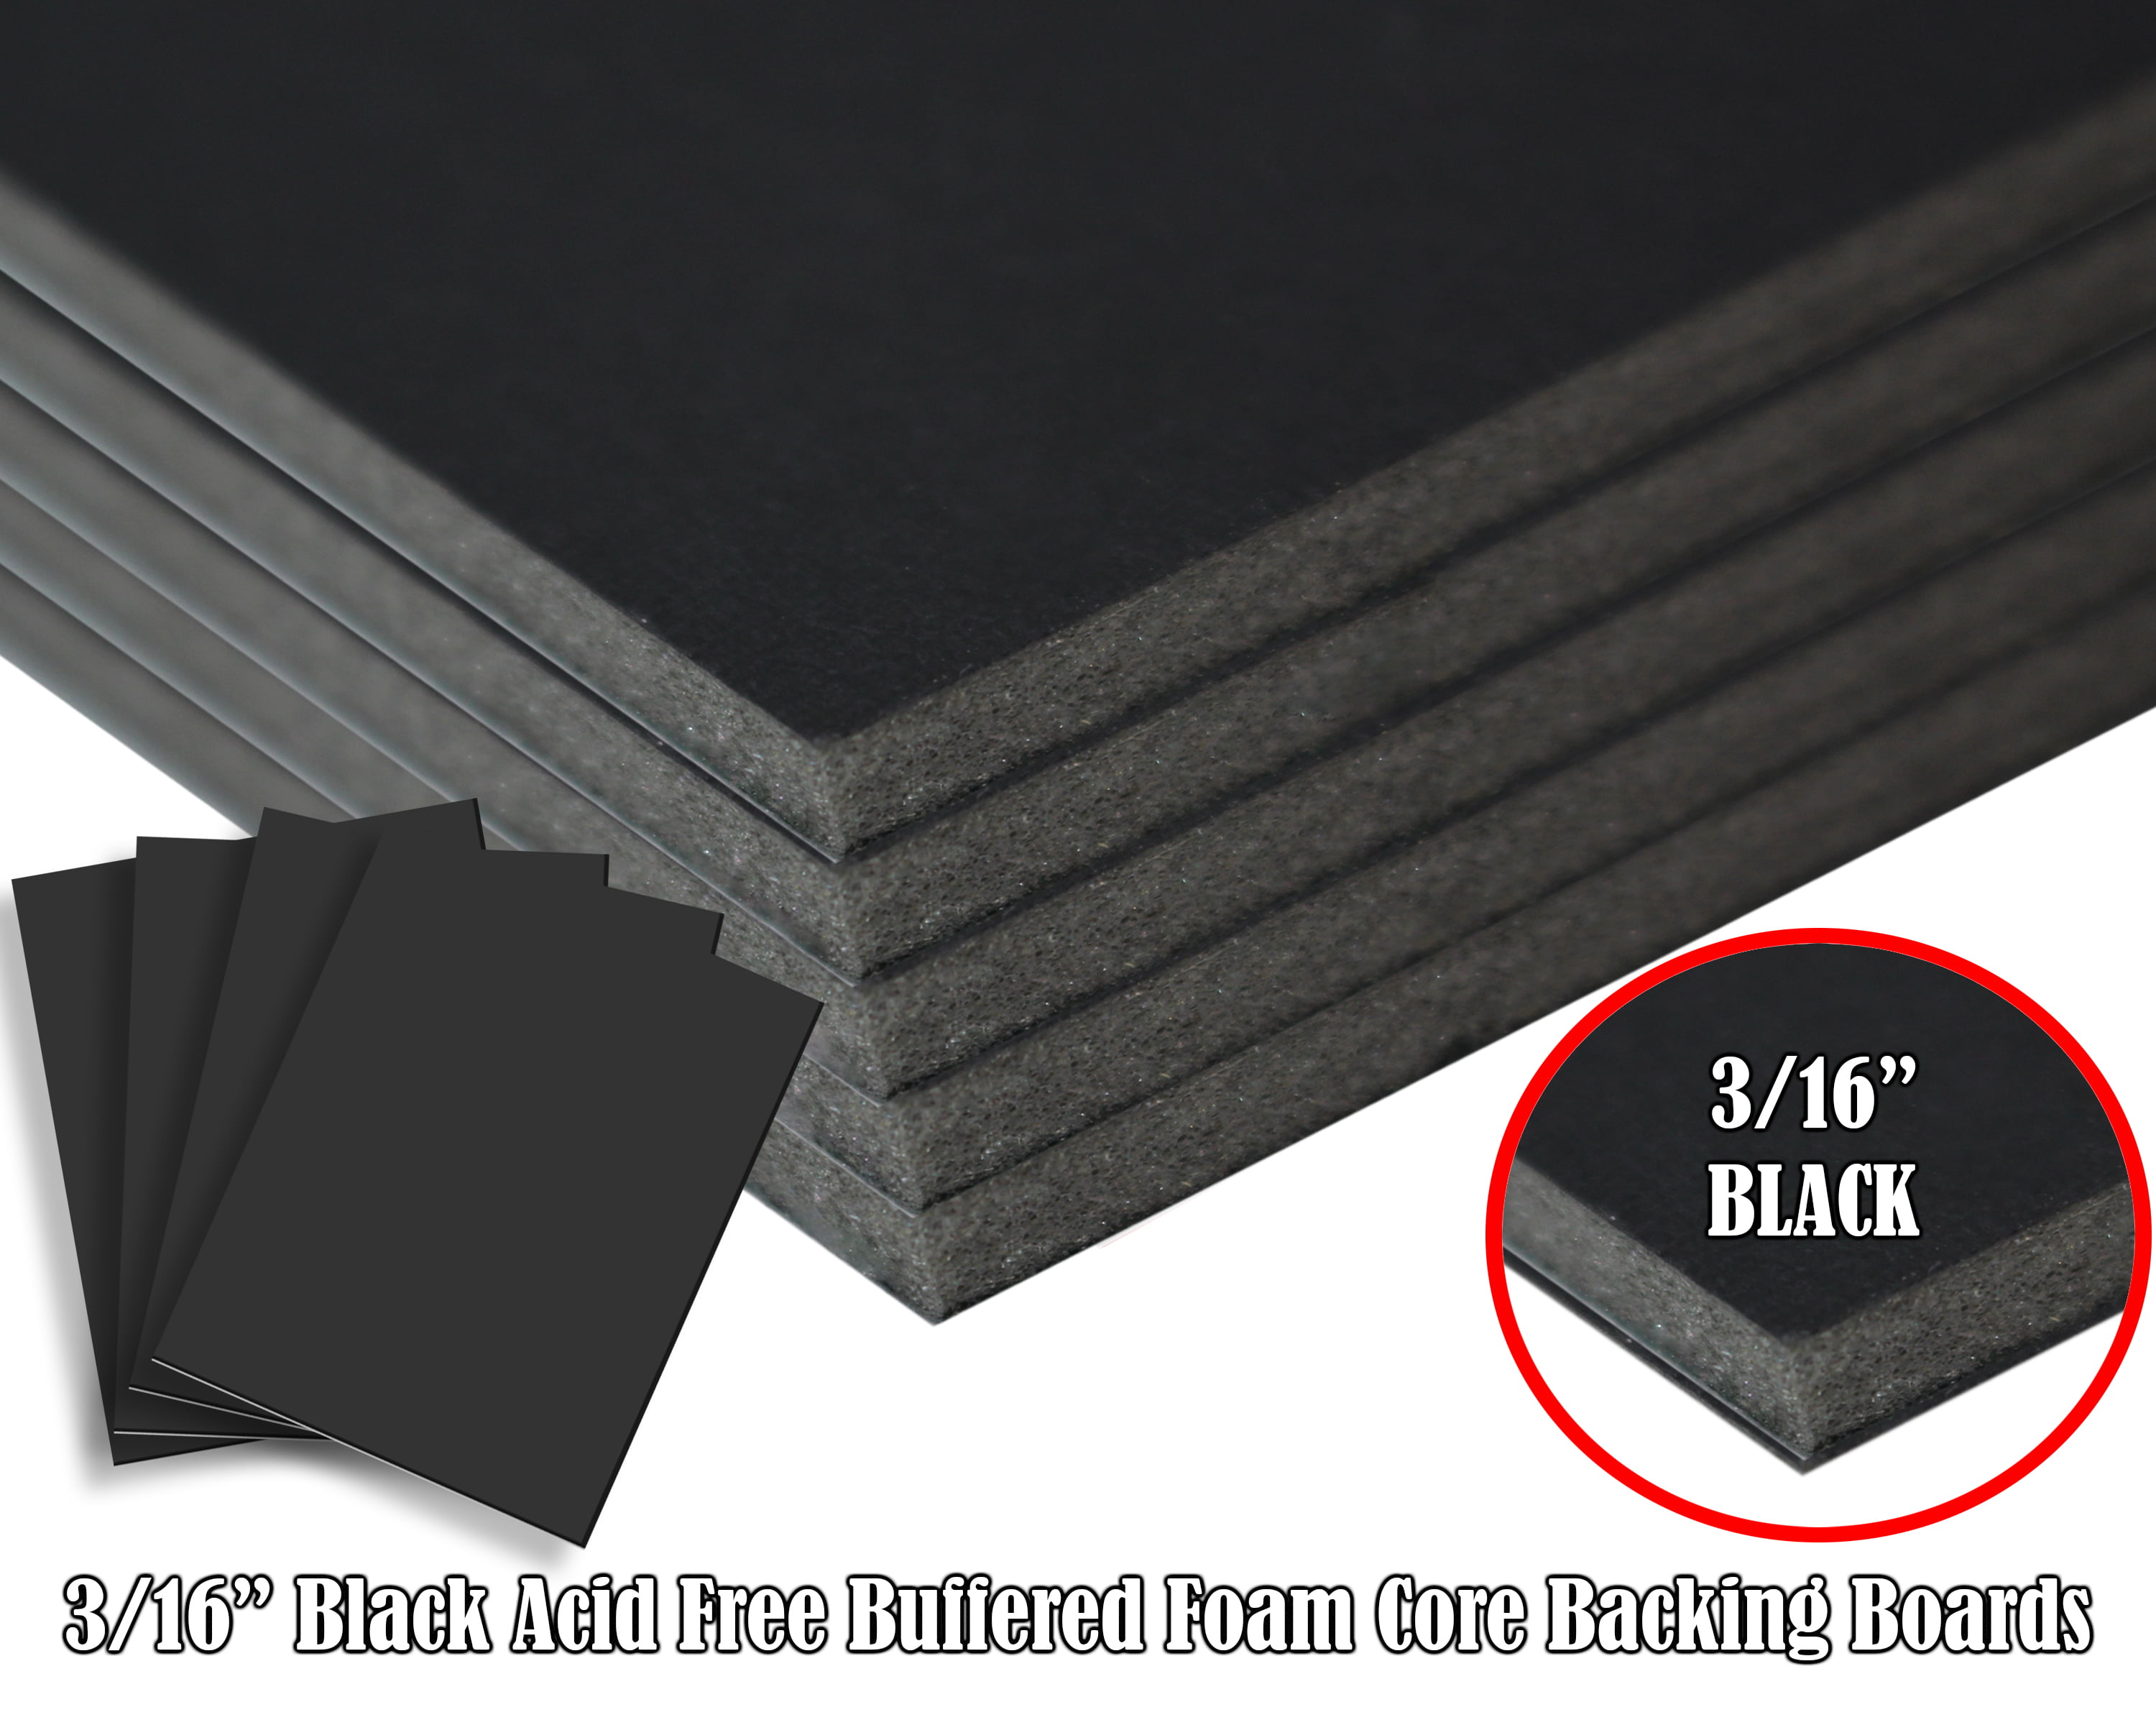 Foam Core Backing Board 3/16 Black 12x24- 5 Pack. Many Sizes Available.  Acid Free Buffered Craft Poster Board for Signs, Presentations, School,  Office and Art Projects 